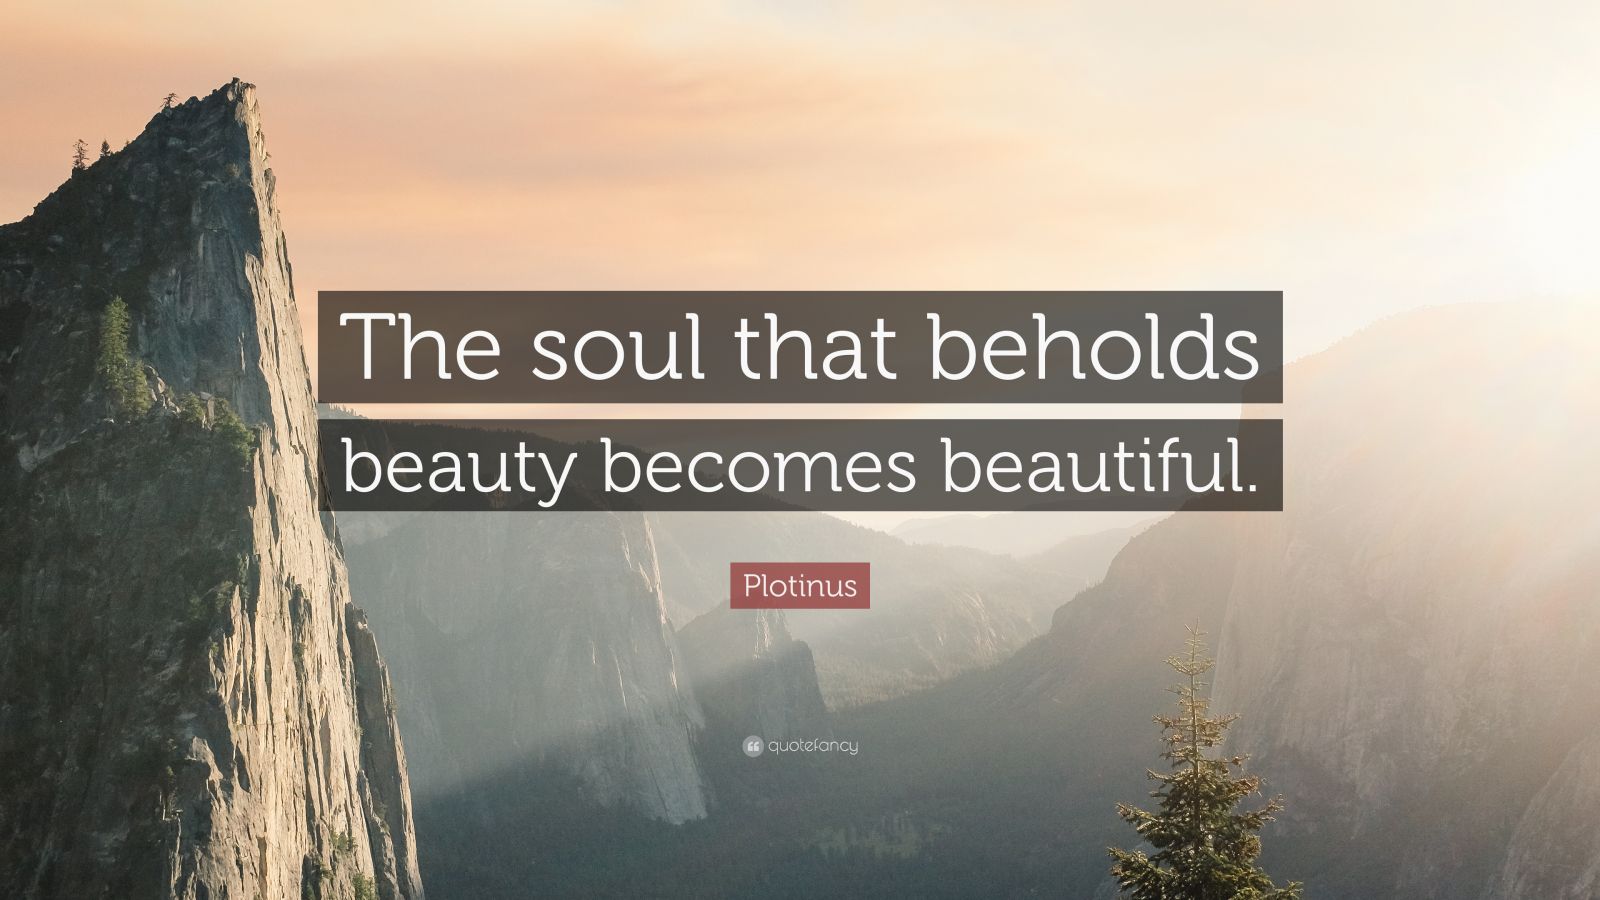 Plotinus Quote: “The soul that beholds beauty becomes beautiful.” (7 ...